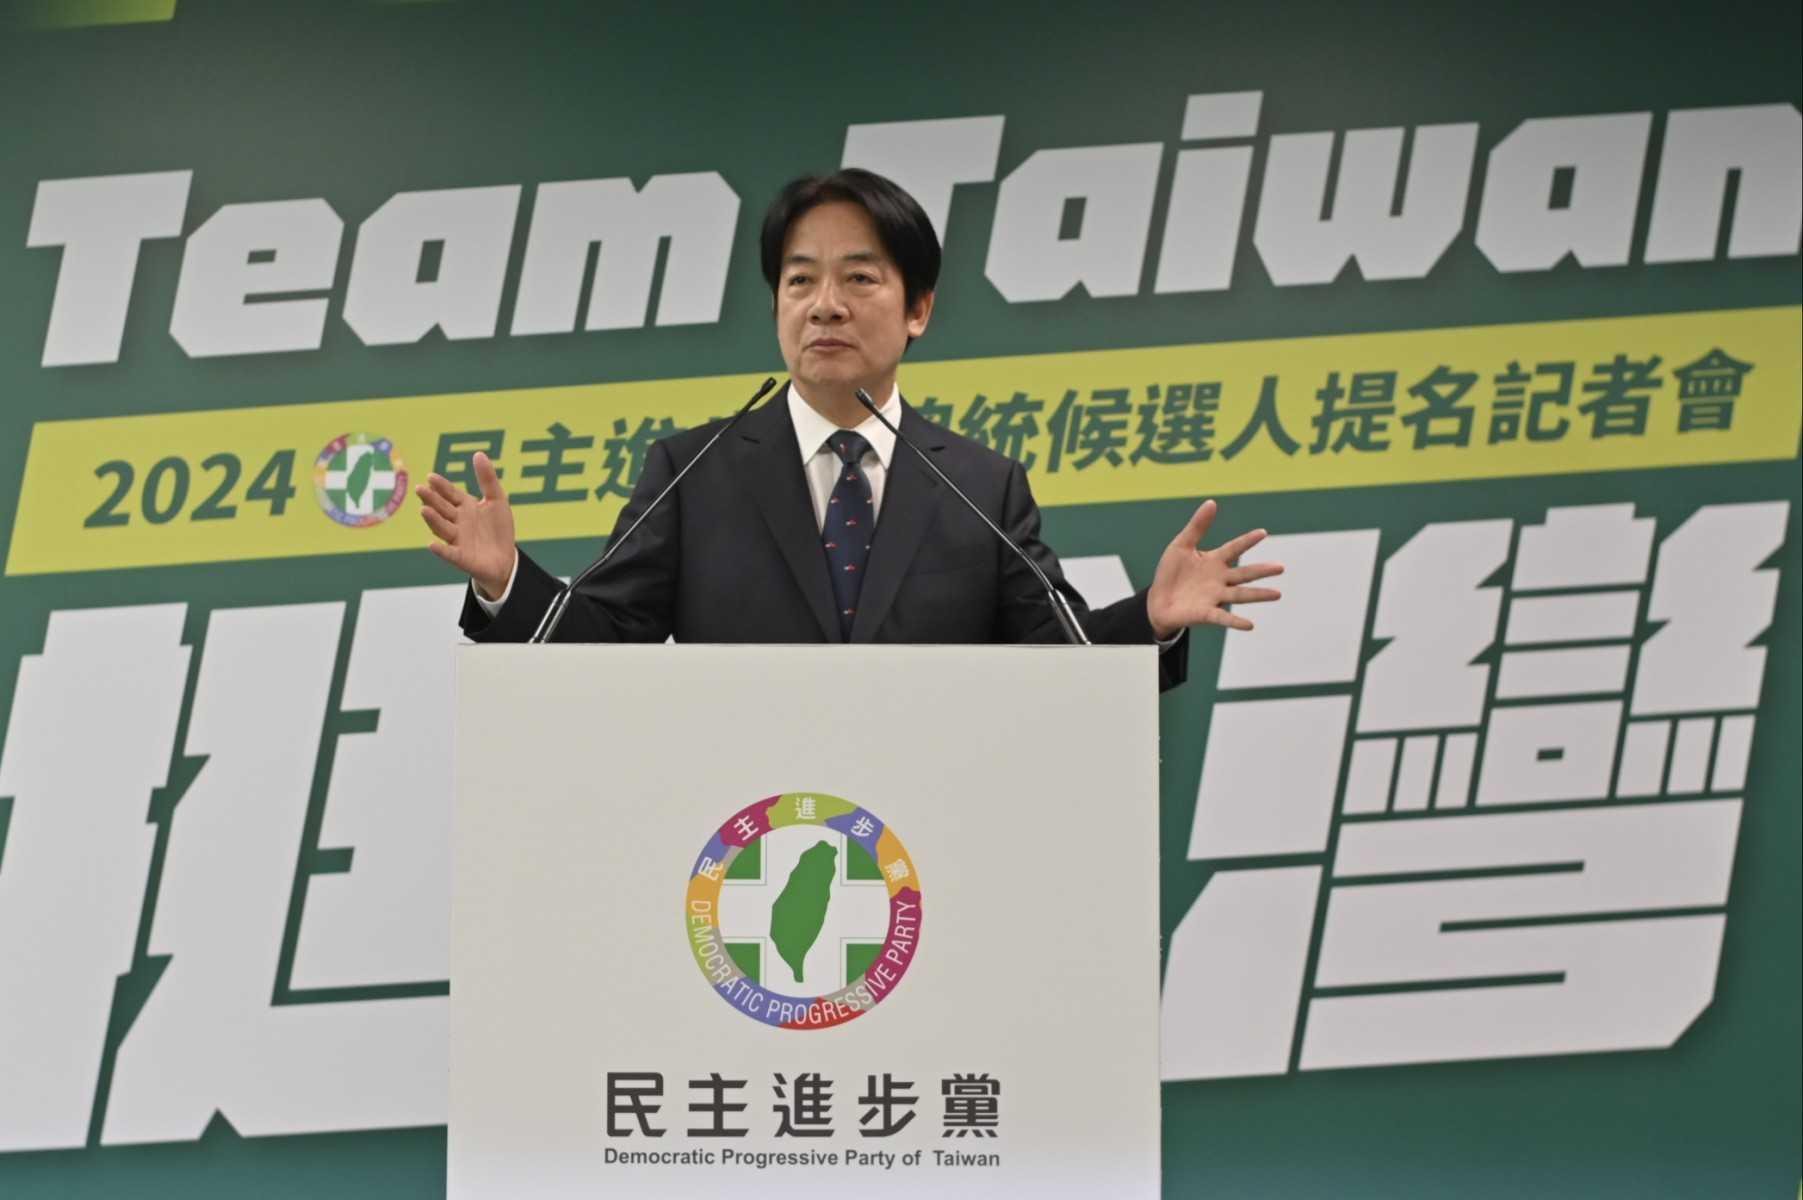 Taiwan Vice President and Chairman of ruling Democratic Progressive Party (DPP) William Lai gestures during his speech at the DPP headquarters in Taipei on April 12. Photo: AFP 